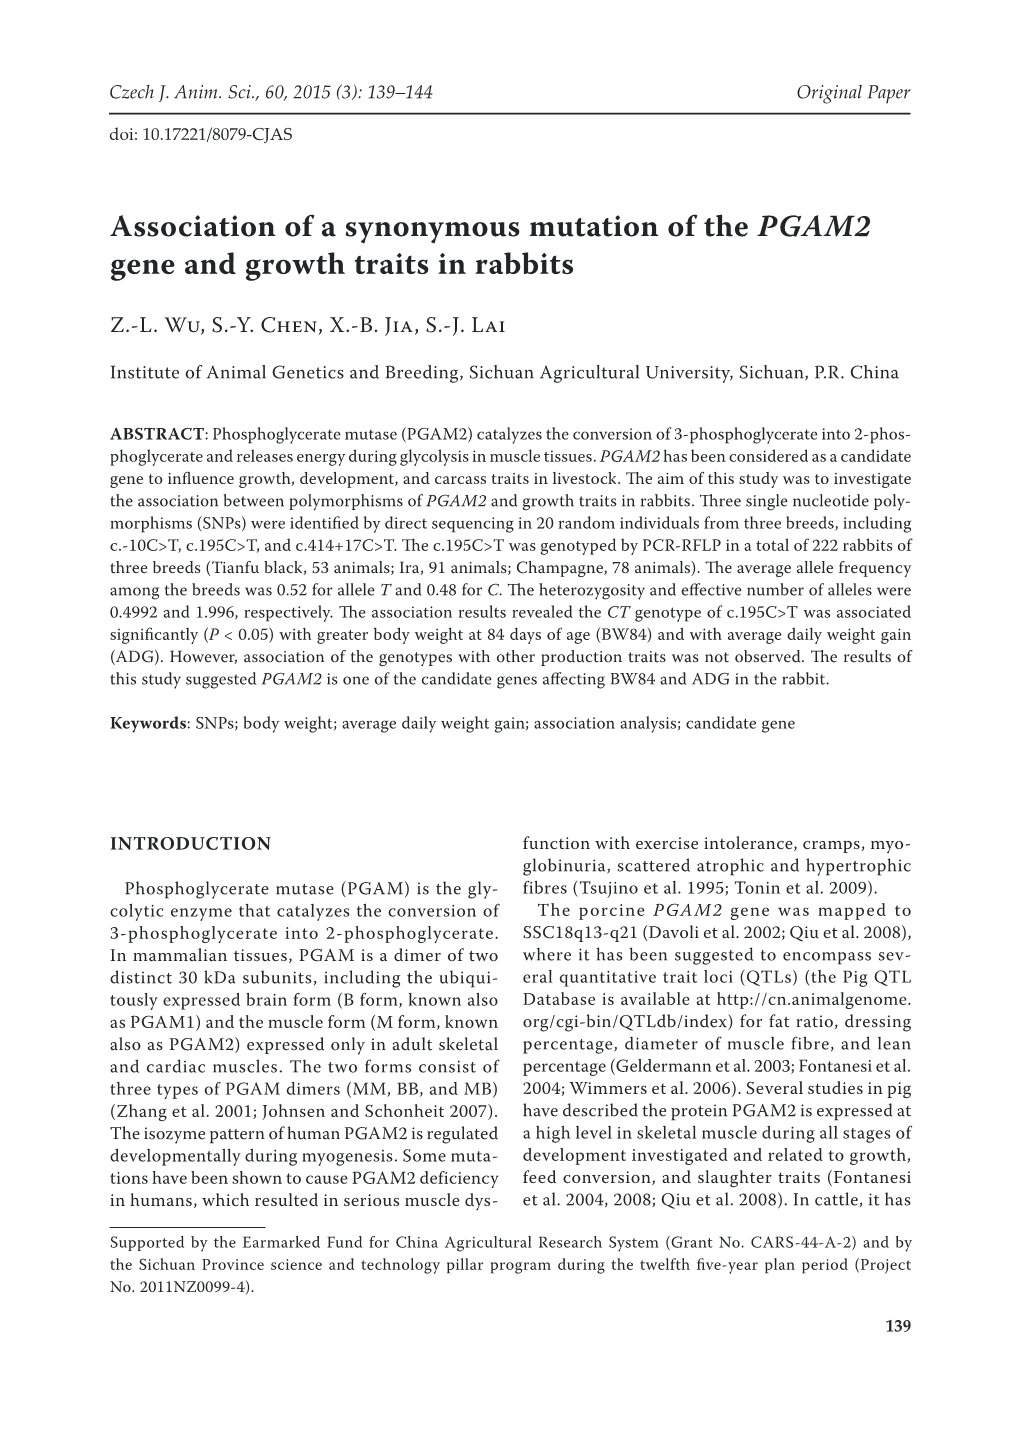 Association of a Synonymous Mutation of the PGAM2 Gene and Growth Traits in Rabbits